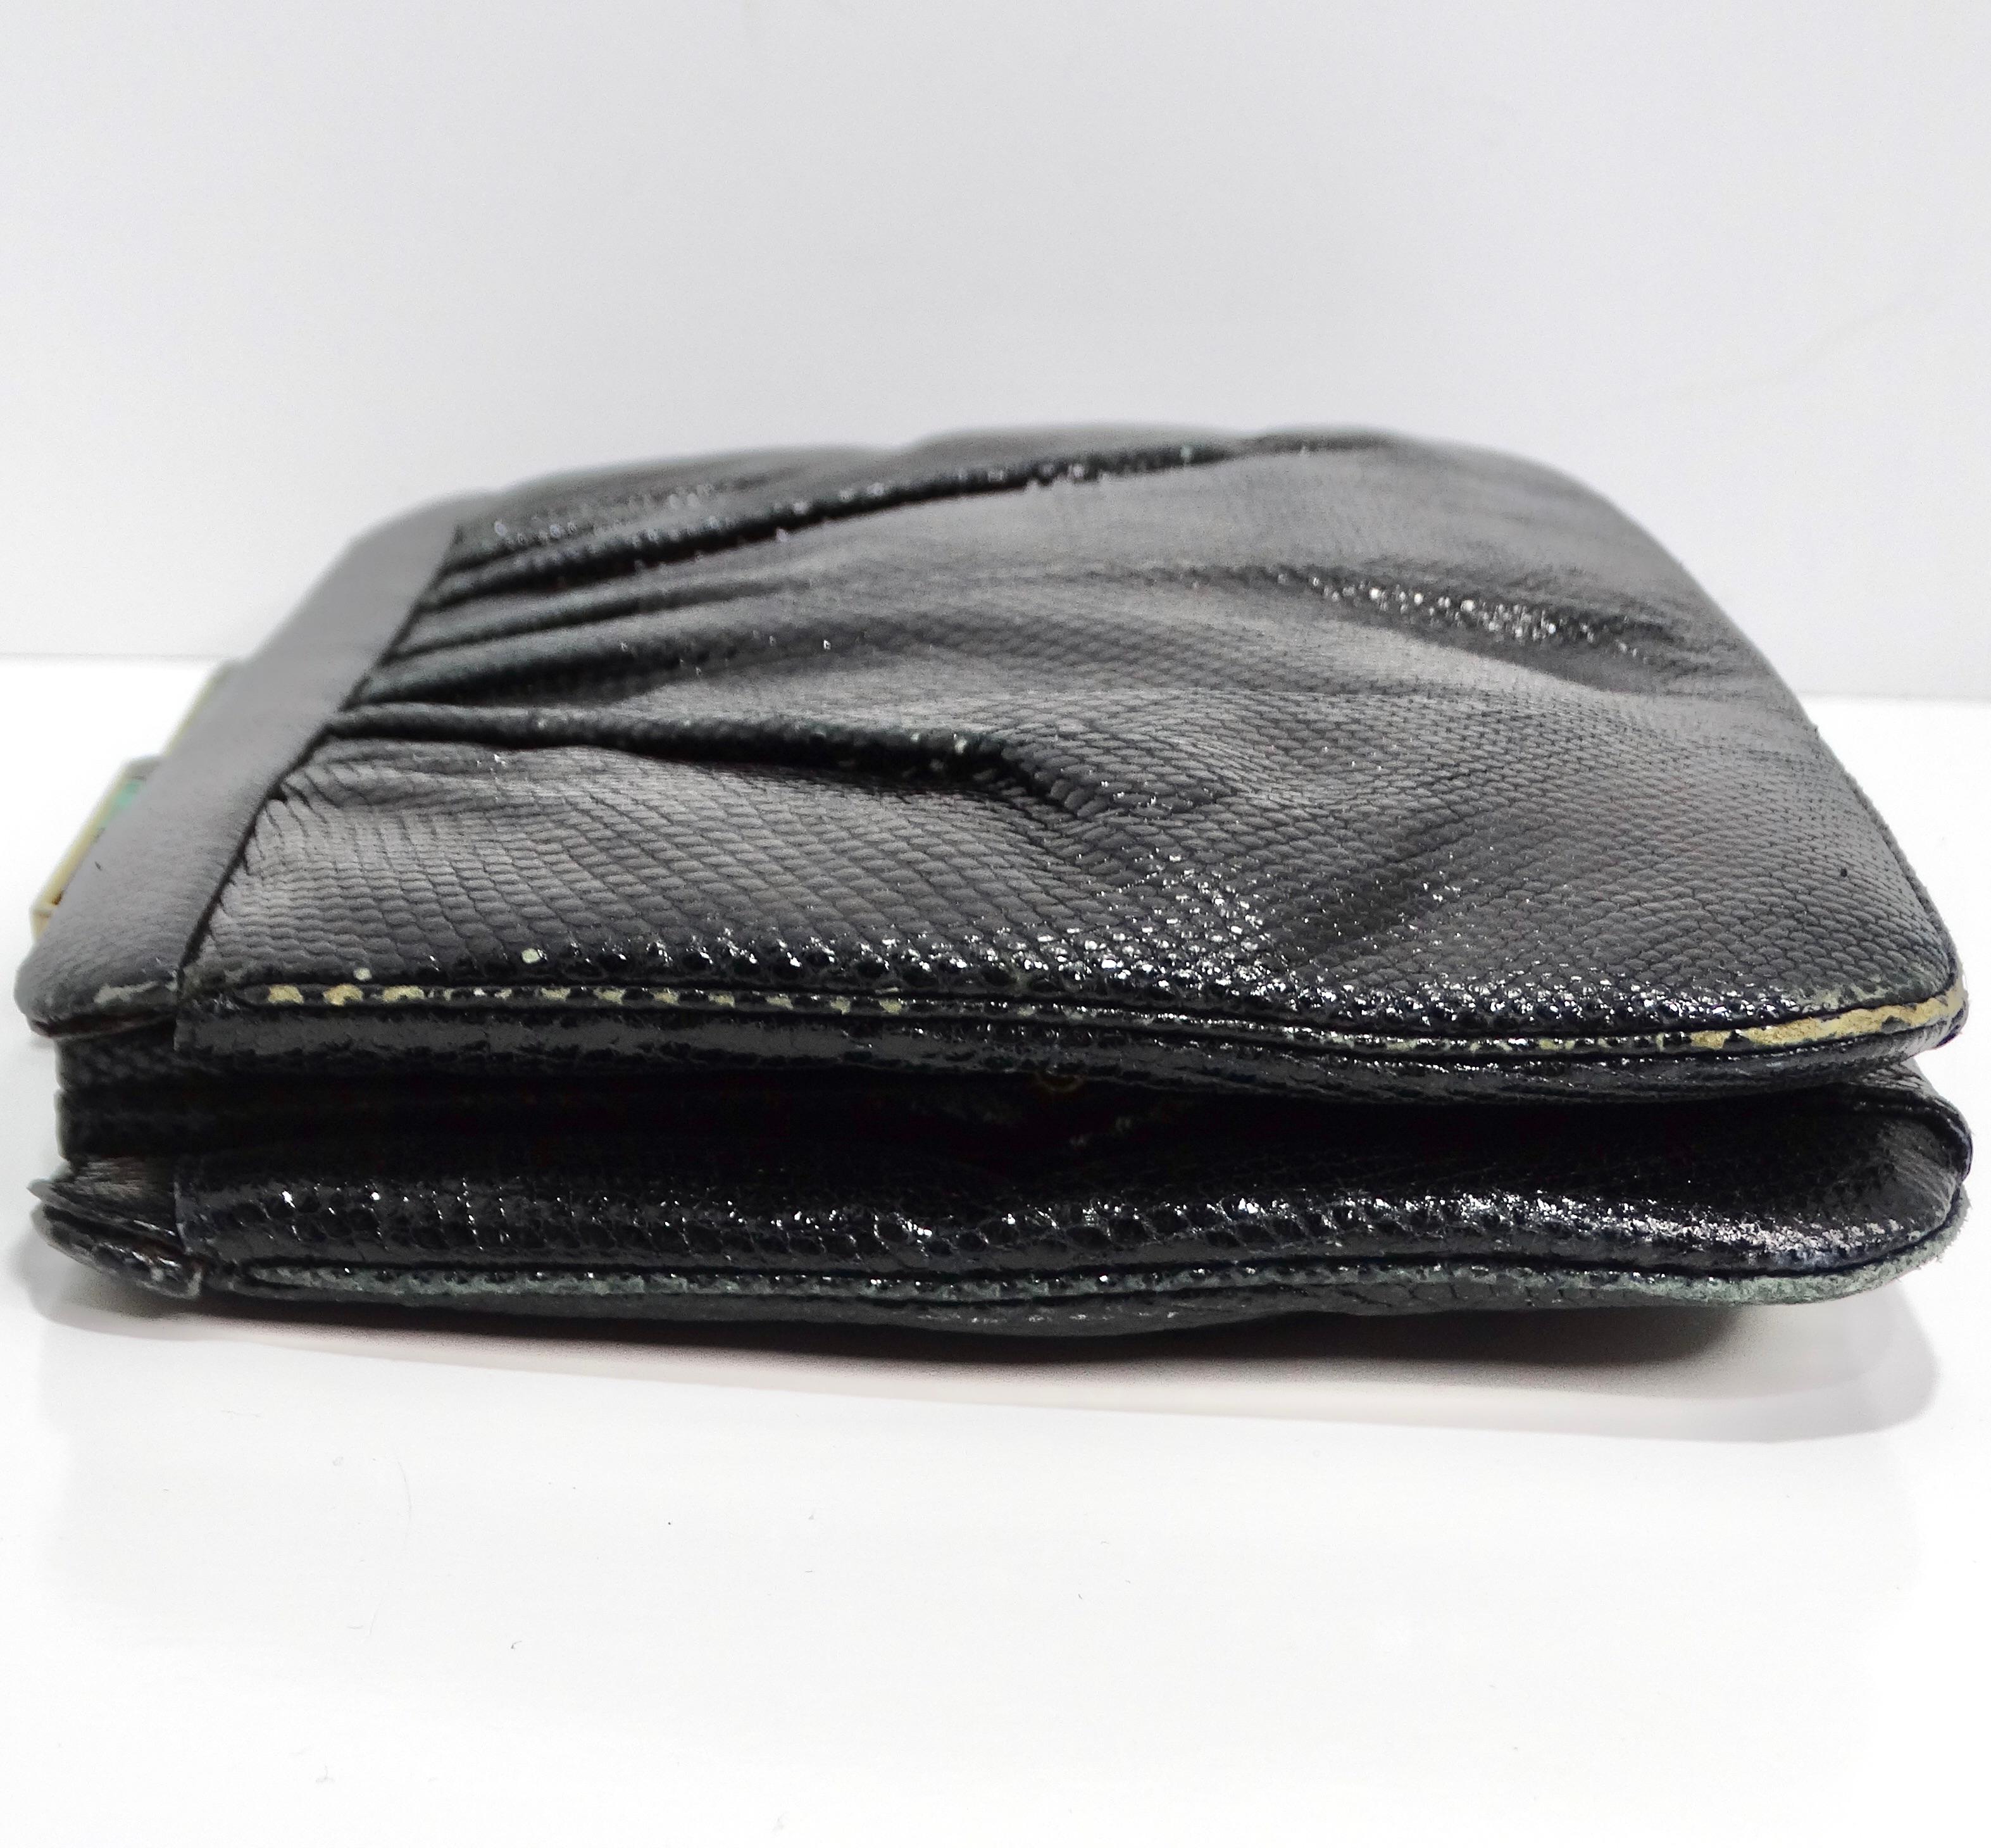 Judith Leiber 1980s Black Lizard Embossed Clutch In Excellent Condition For Sale In Scottsdale, AZ